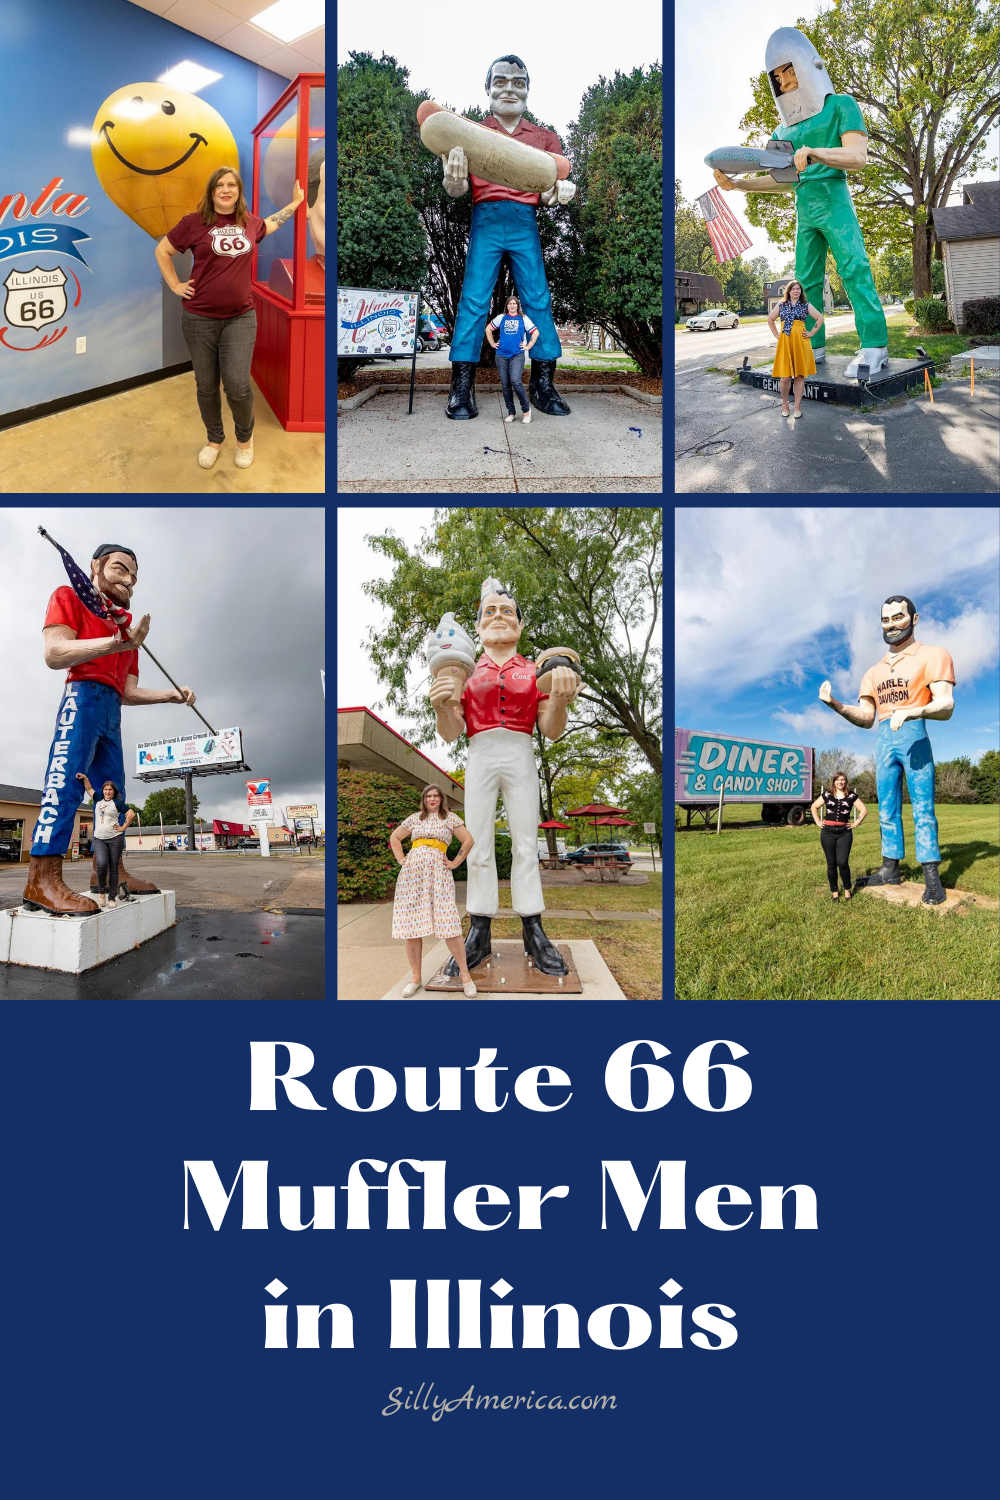 If you're traveling on Route 66 you'll find roadside attractions of every sort. There's one roadside attraction that particularly stands out: the muffler man. Known for their "three gentle giants of Illinois" you can find three famous Route 66 Muffler Men in Illinois and a few more of their friends too.  #RoadTrips #RoadTripStop #Route66 #Route66RoadTrip #IllinoisRoute66 #Illinois #IllinoisRoadTrip #IllinoisRoadsideAttractions #RoadsideAttractions #RoadsideAttraction #RoadsideAmerica #RoadTrip